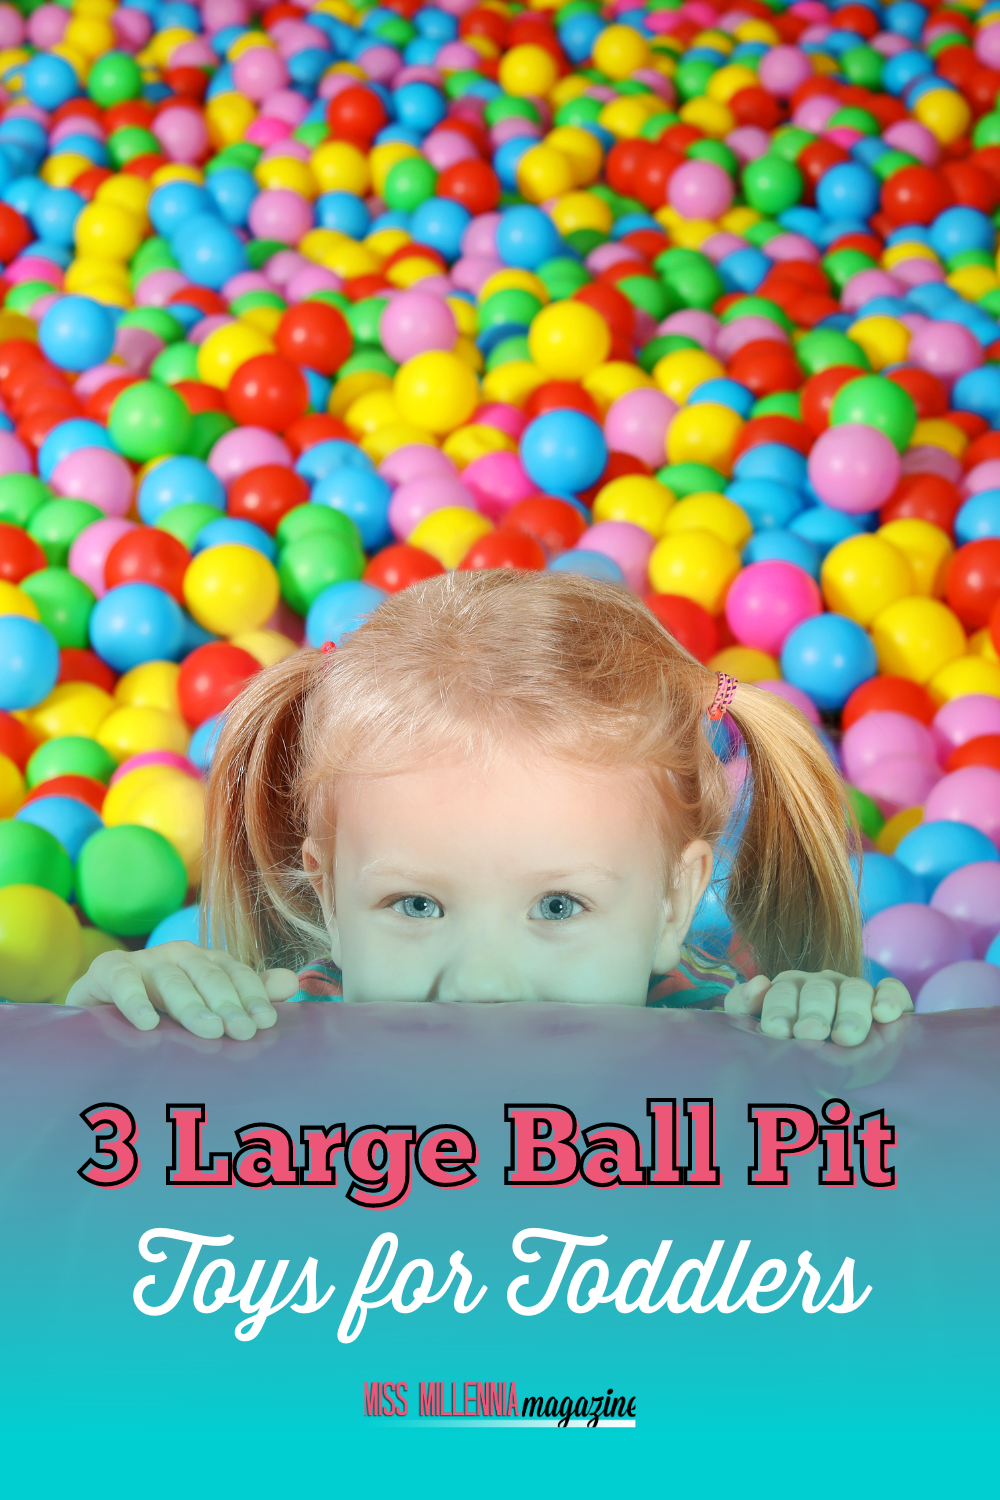 3 Large Ball Pit Toys for Toddlers